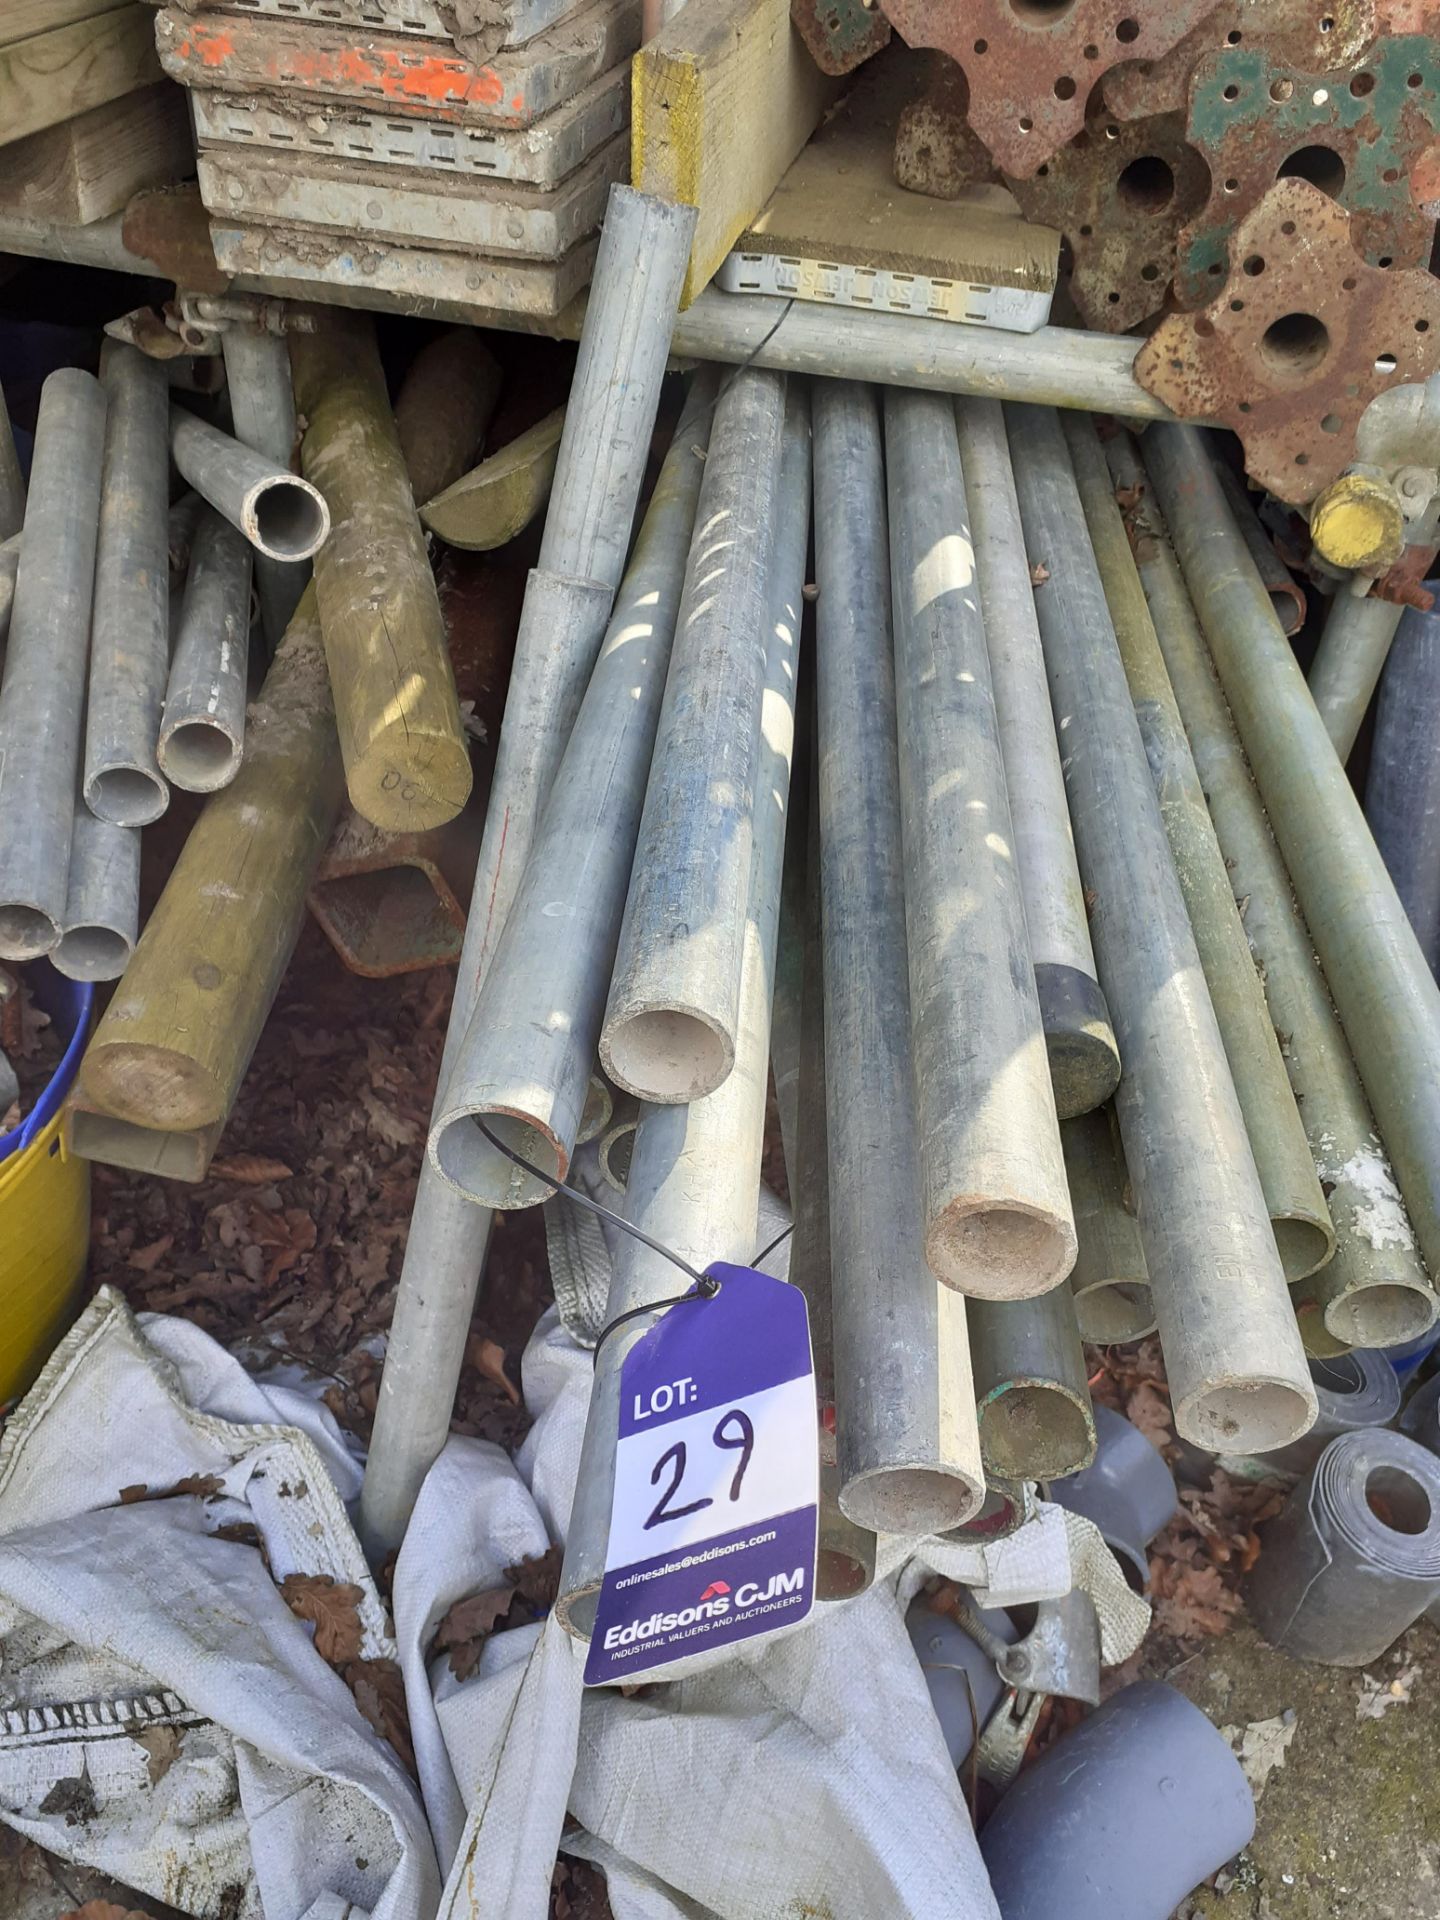 Small Quantity of Scaffold including Boards, Tubes & Clips